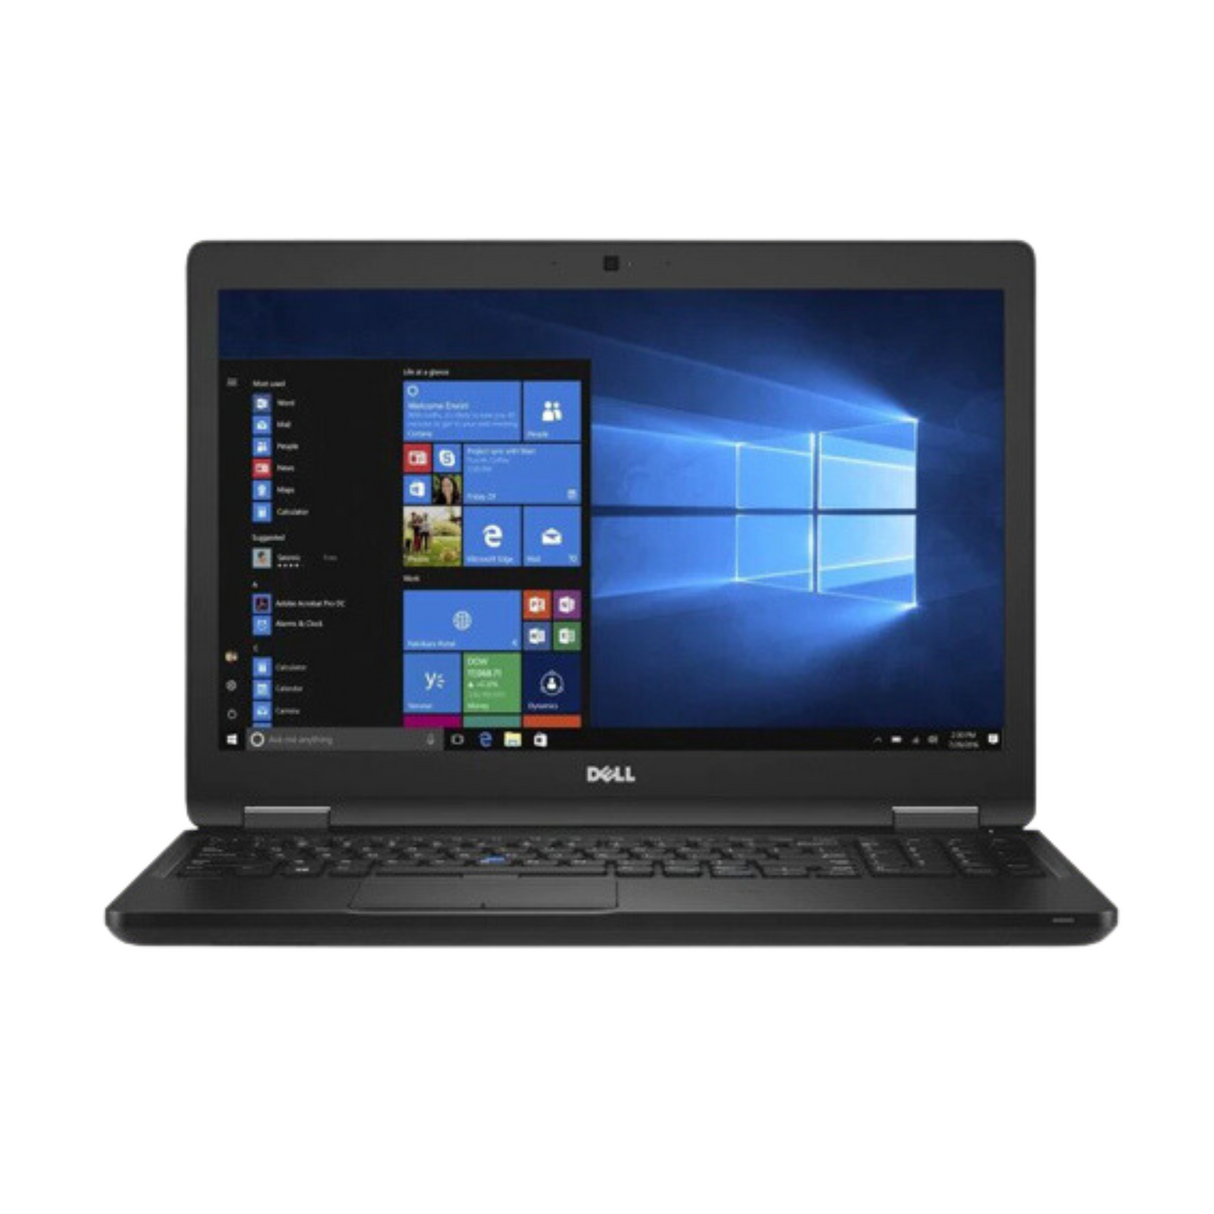 Dell Precision 3520 i7 7th gen Full HD Display mobile workstation with Windows 10 and MS Office 2016 (Refurbished)